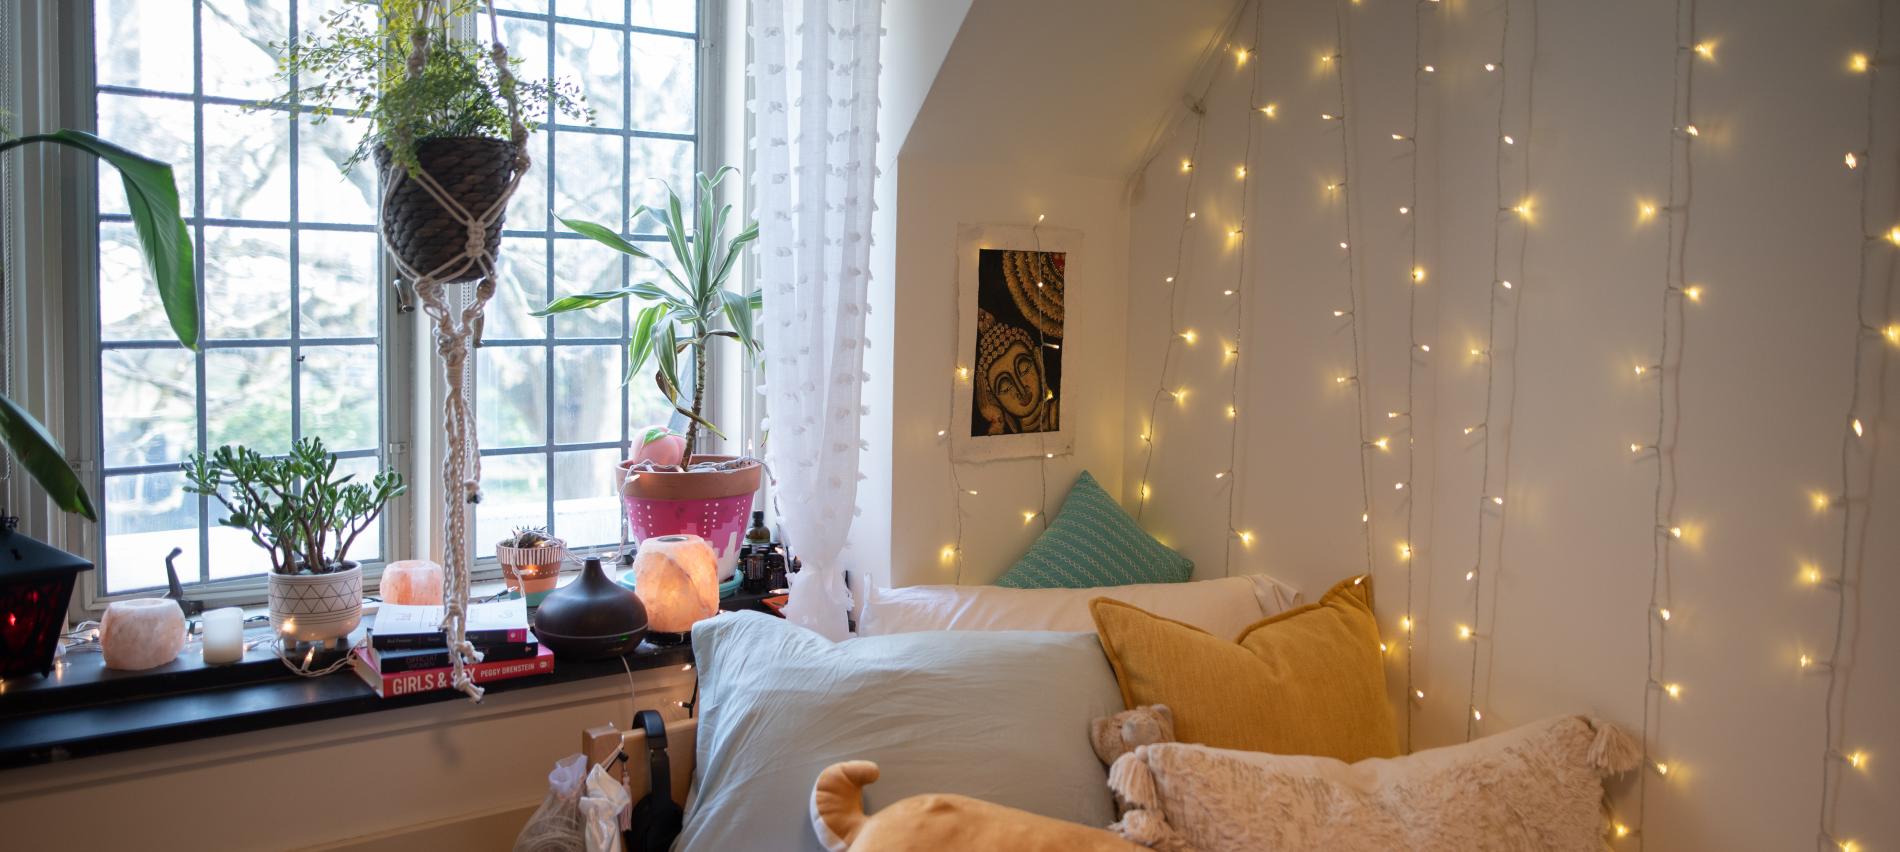 Dorm Room with twinkle lights and plants